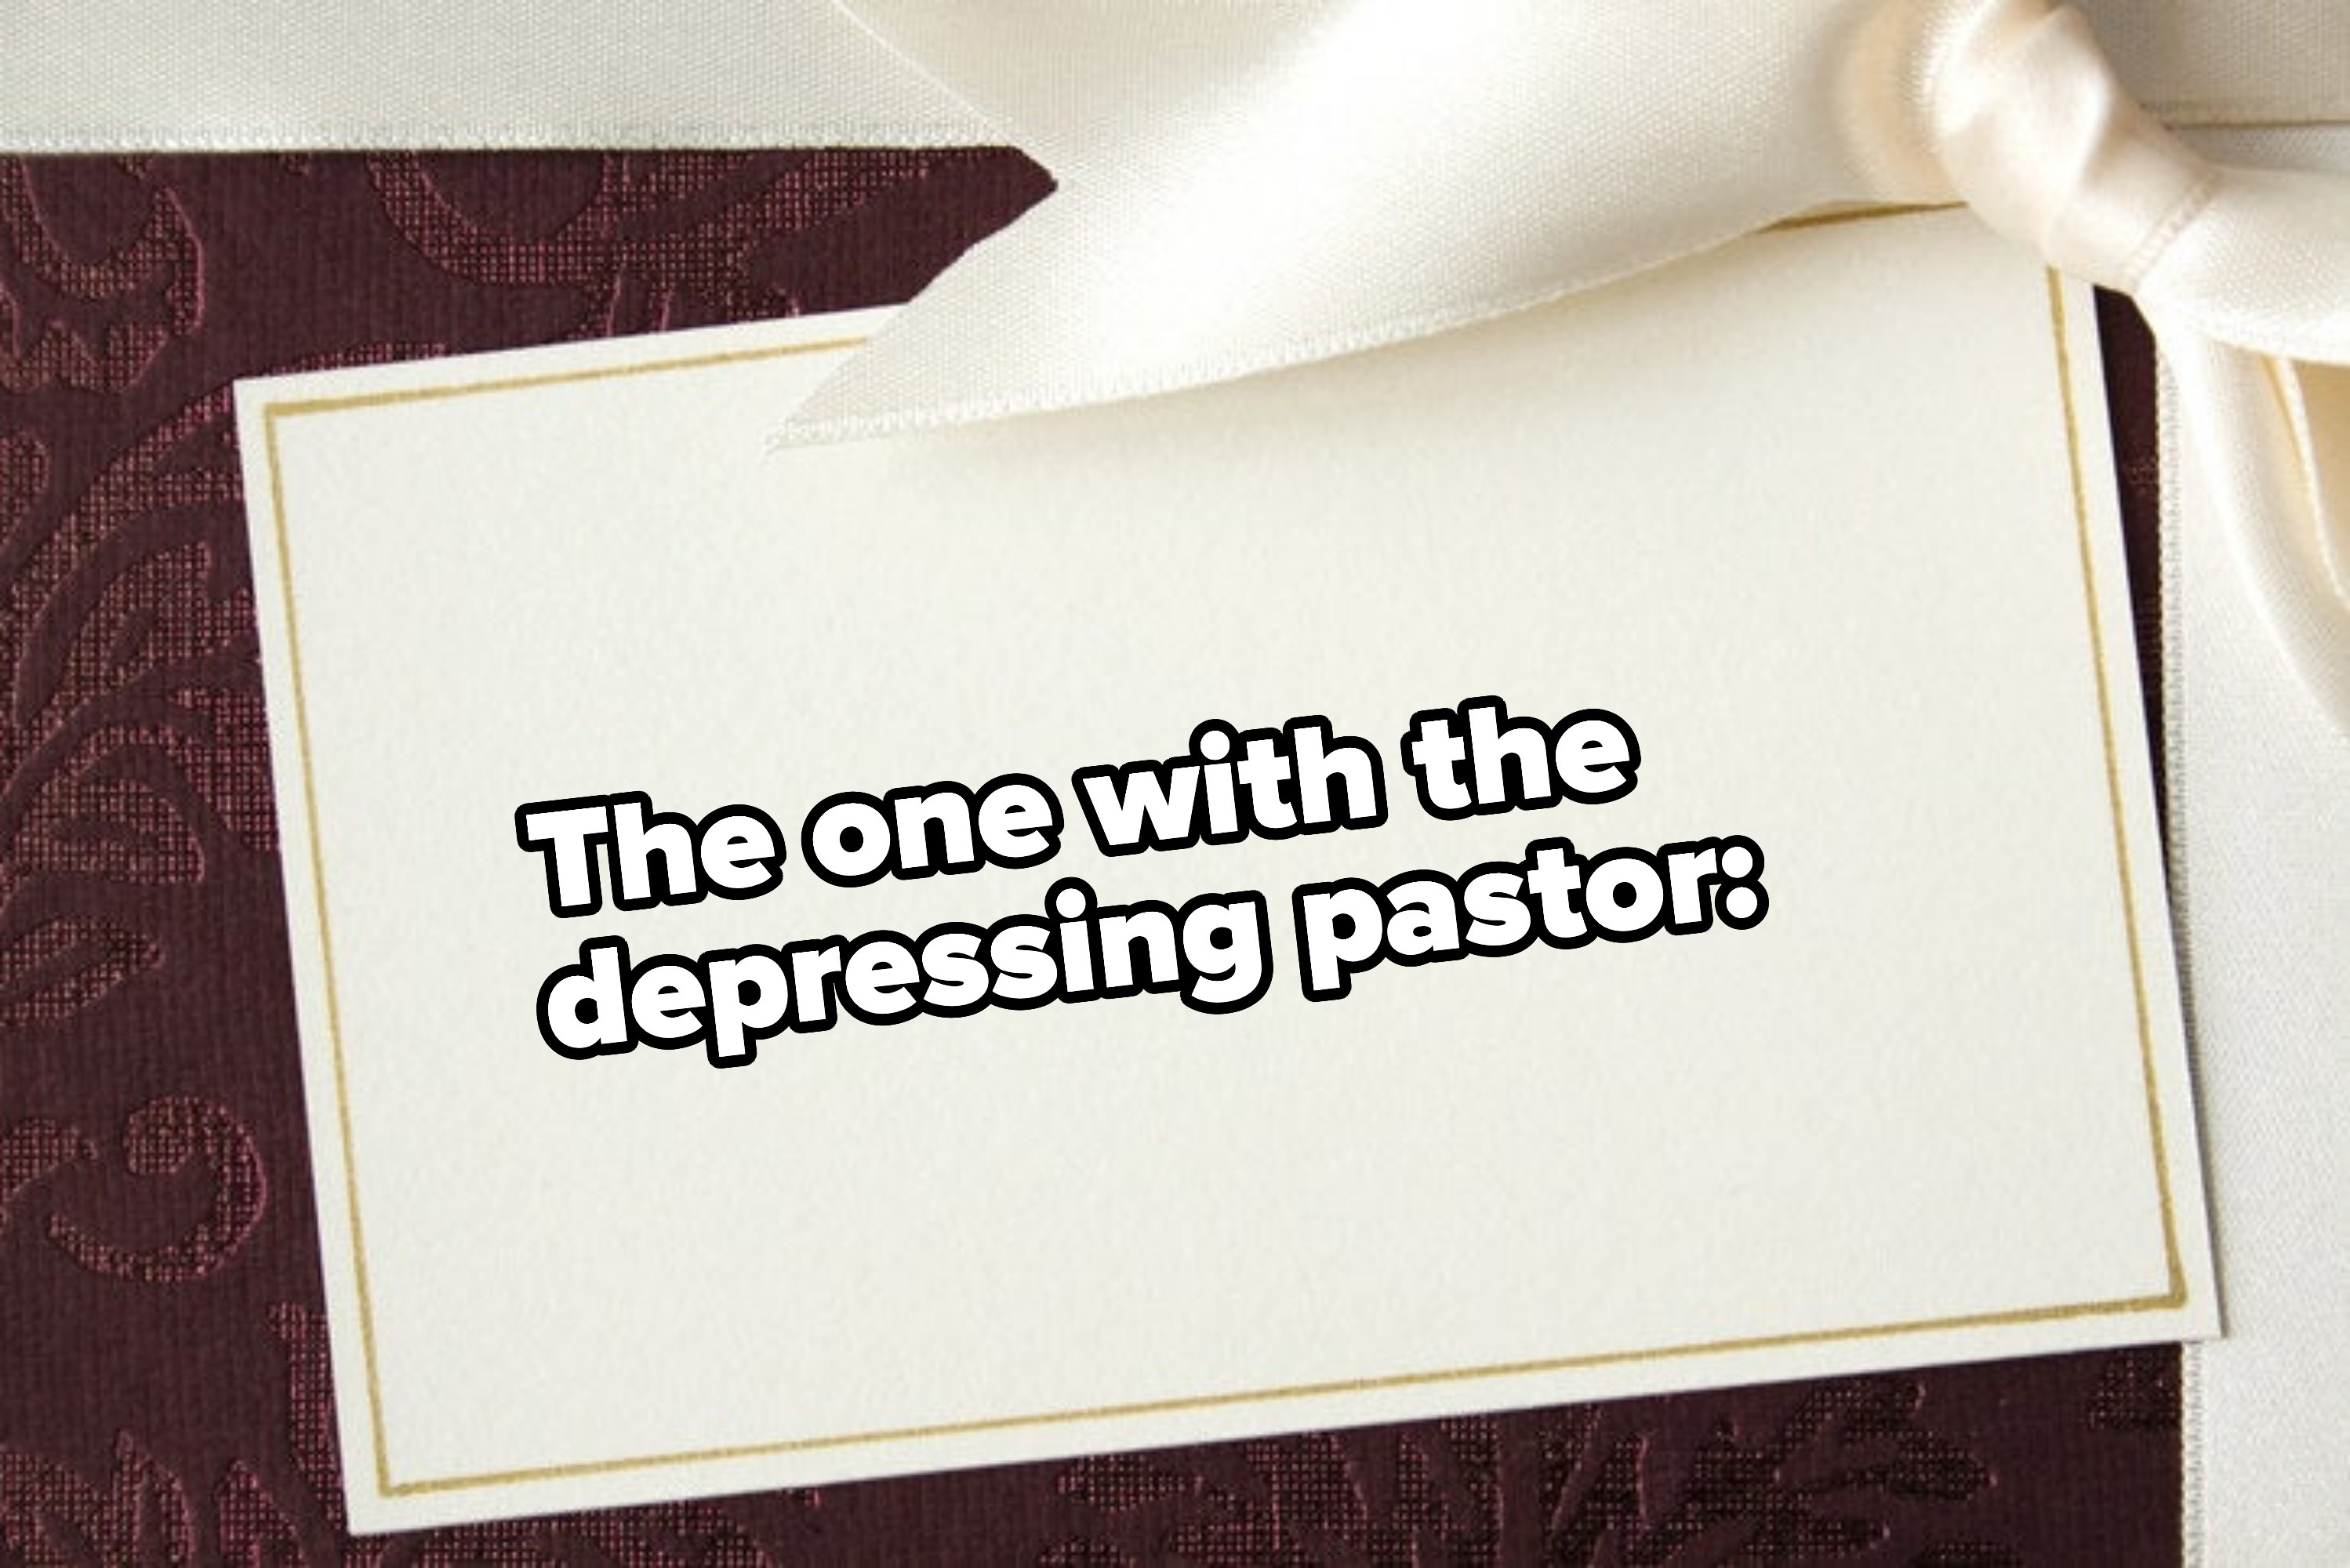 The one with the depressing pastor